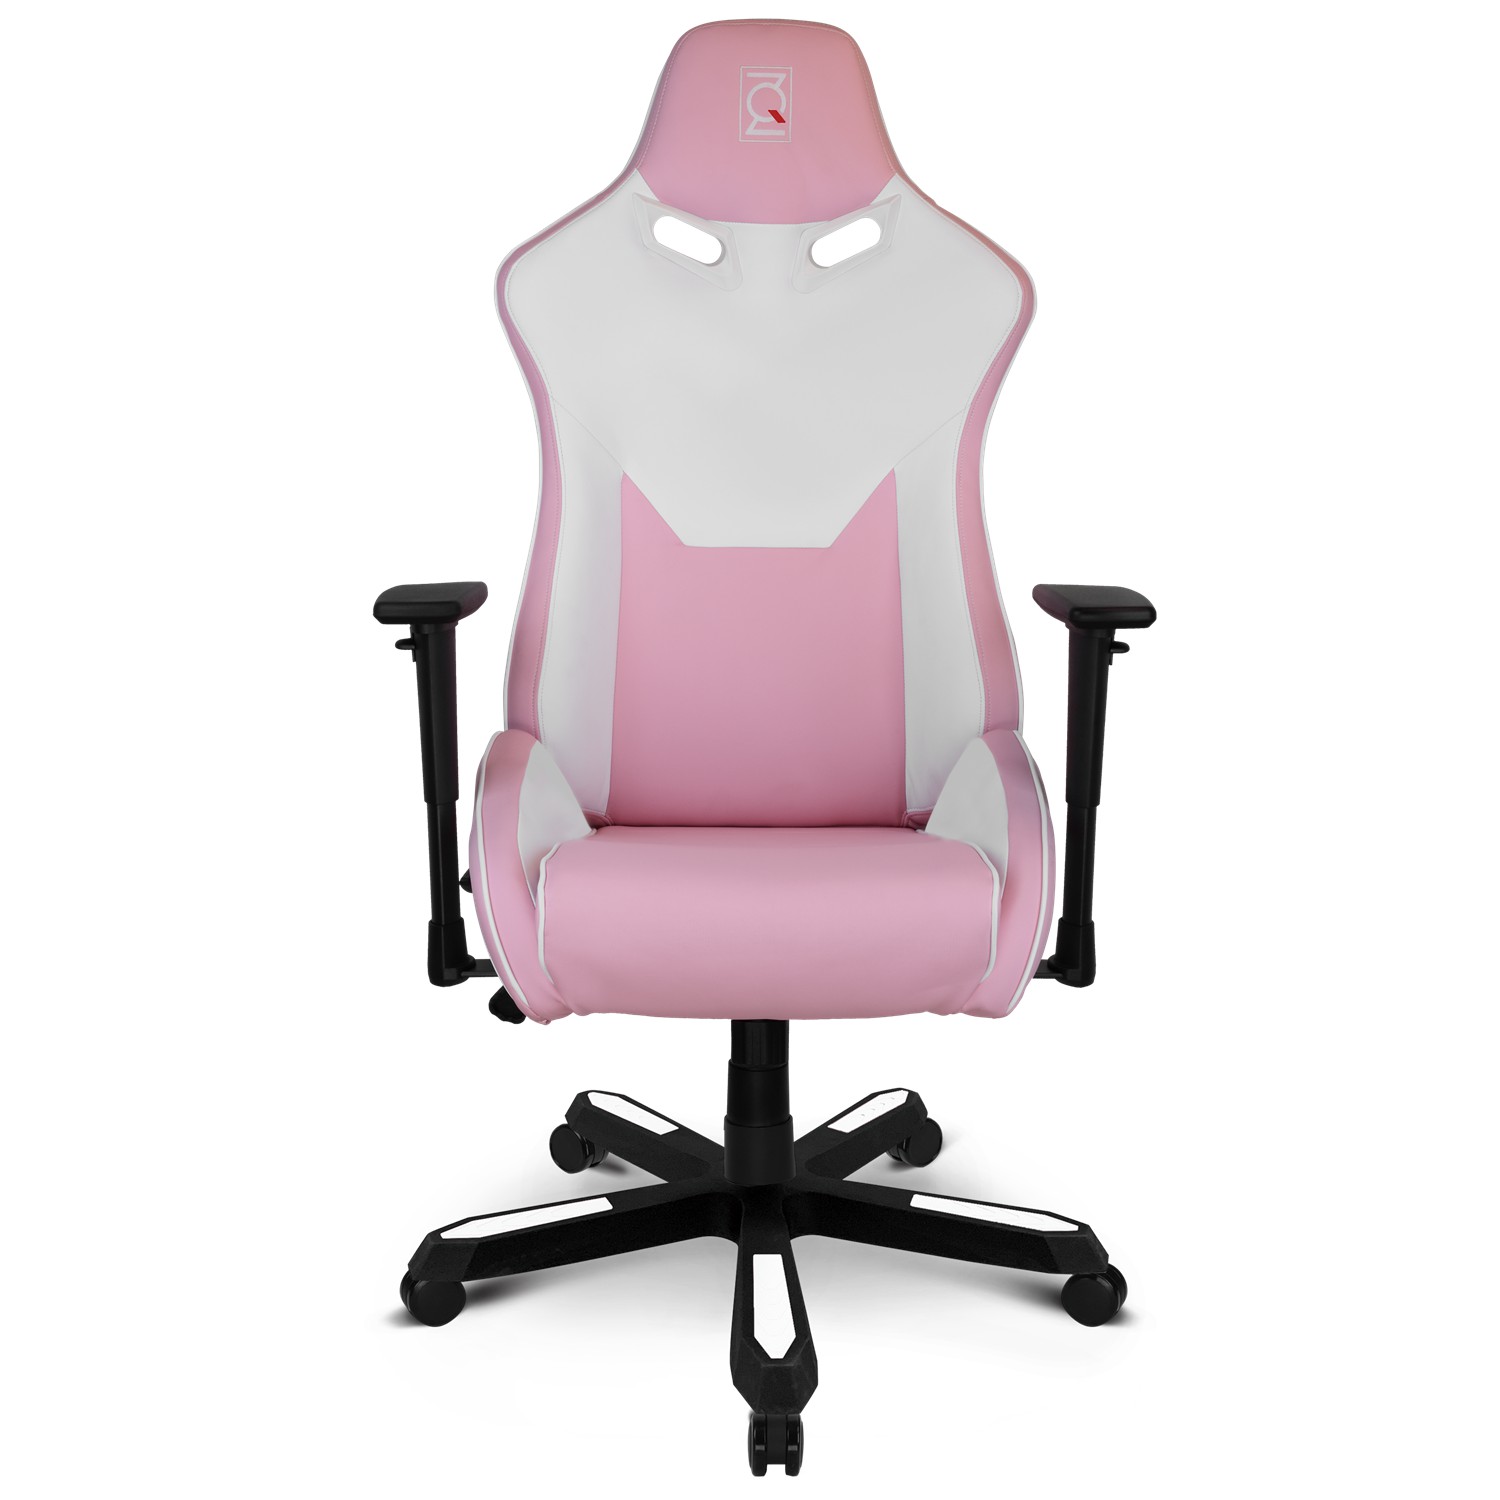 zqracing viper series gaming office chairpinkwhite  zqracing